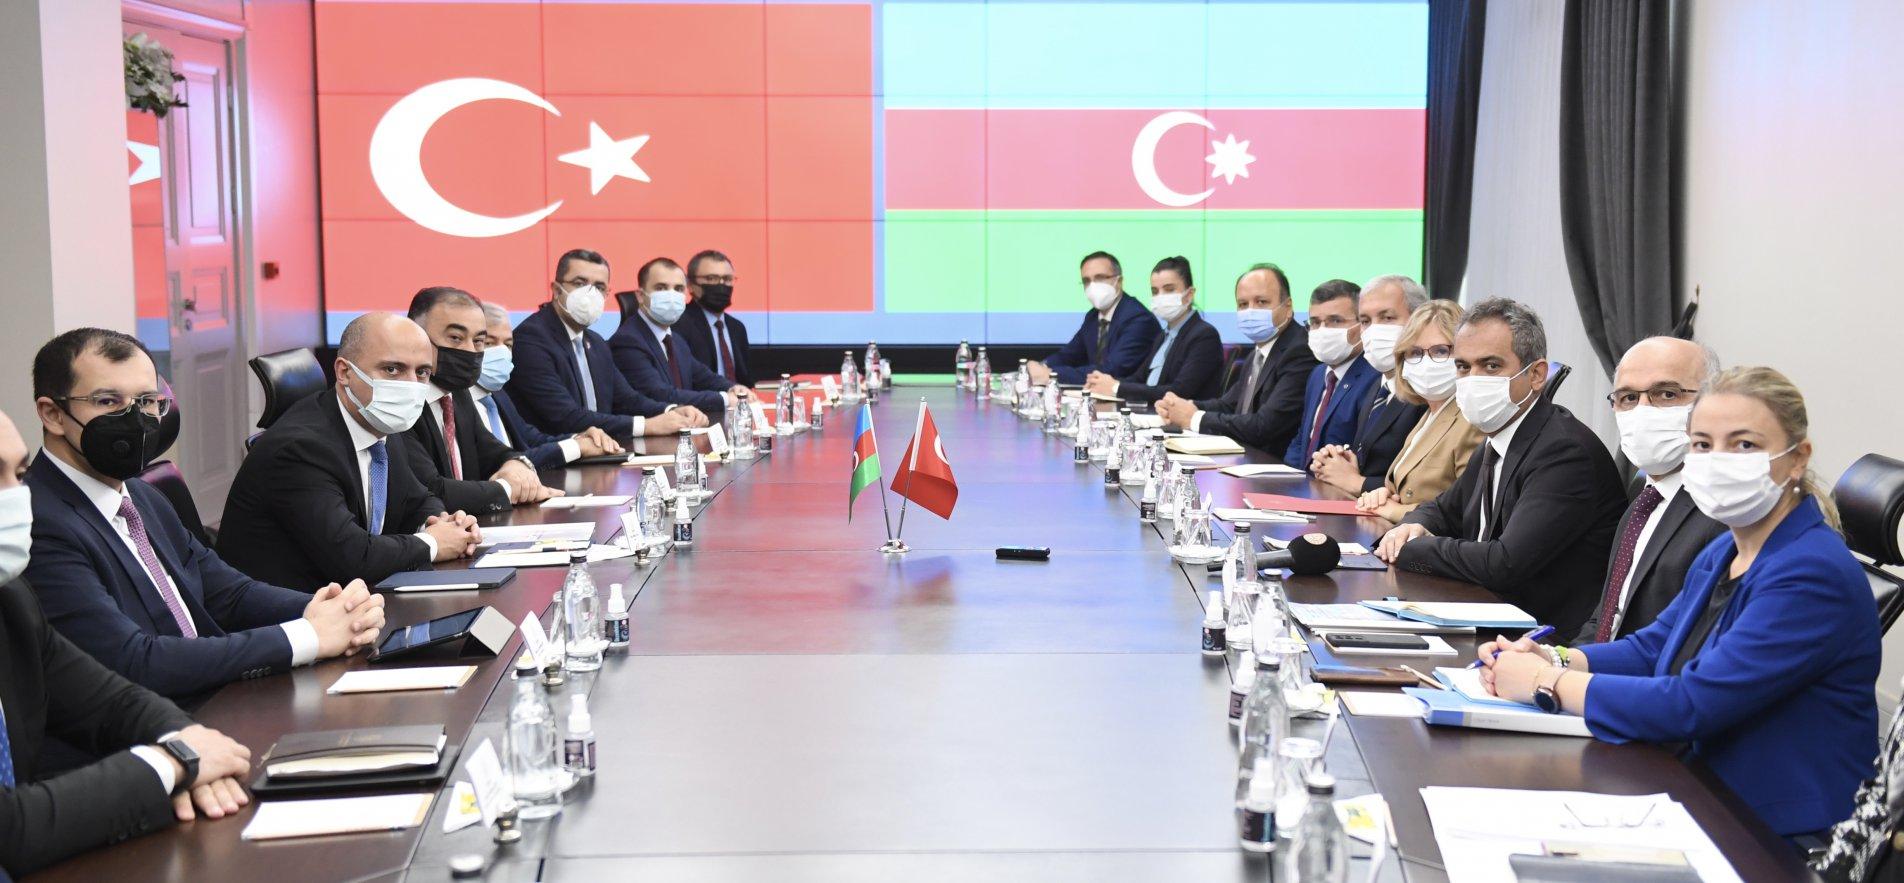 MINISTER ÖZER HAD A MEETING WITH HIS AZERI COUNTERPART AMRULLAYEV